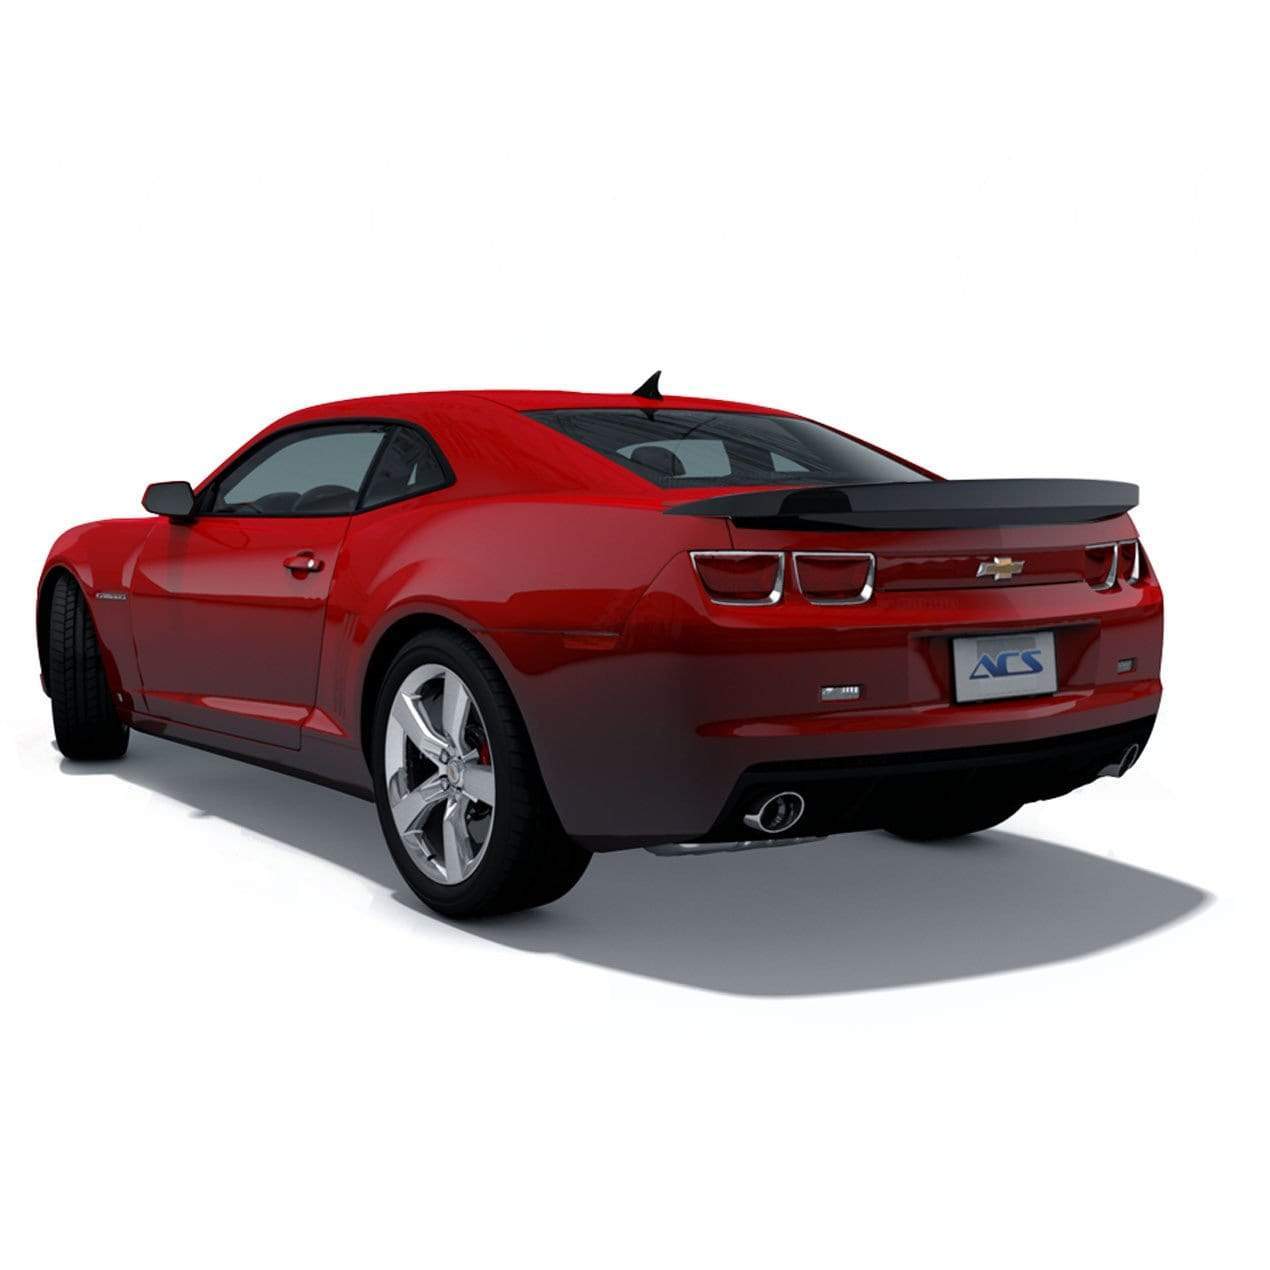 ACS Composite Z/28 Inspired Rear Deck Spoiler [33-4-155]PRM for Camaro 2010-2013, providing downforce and style.